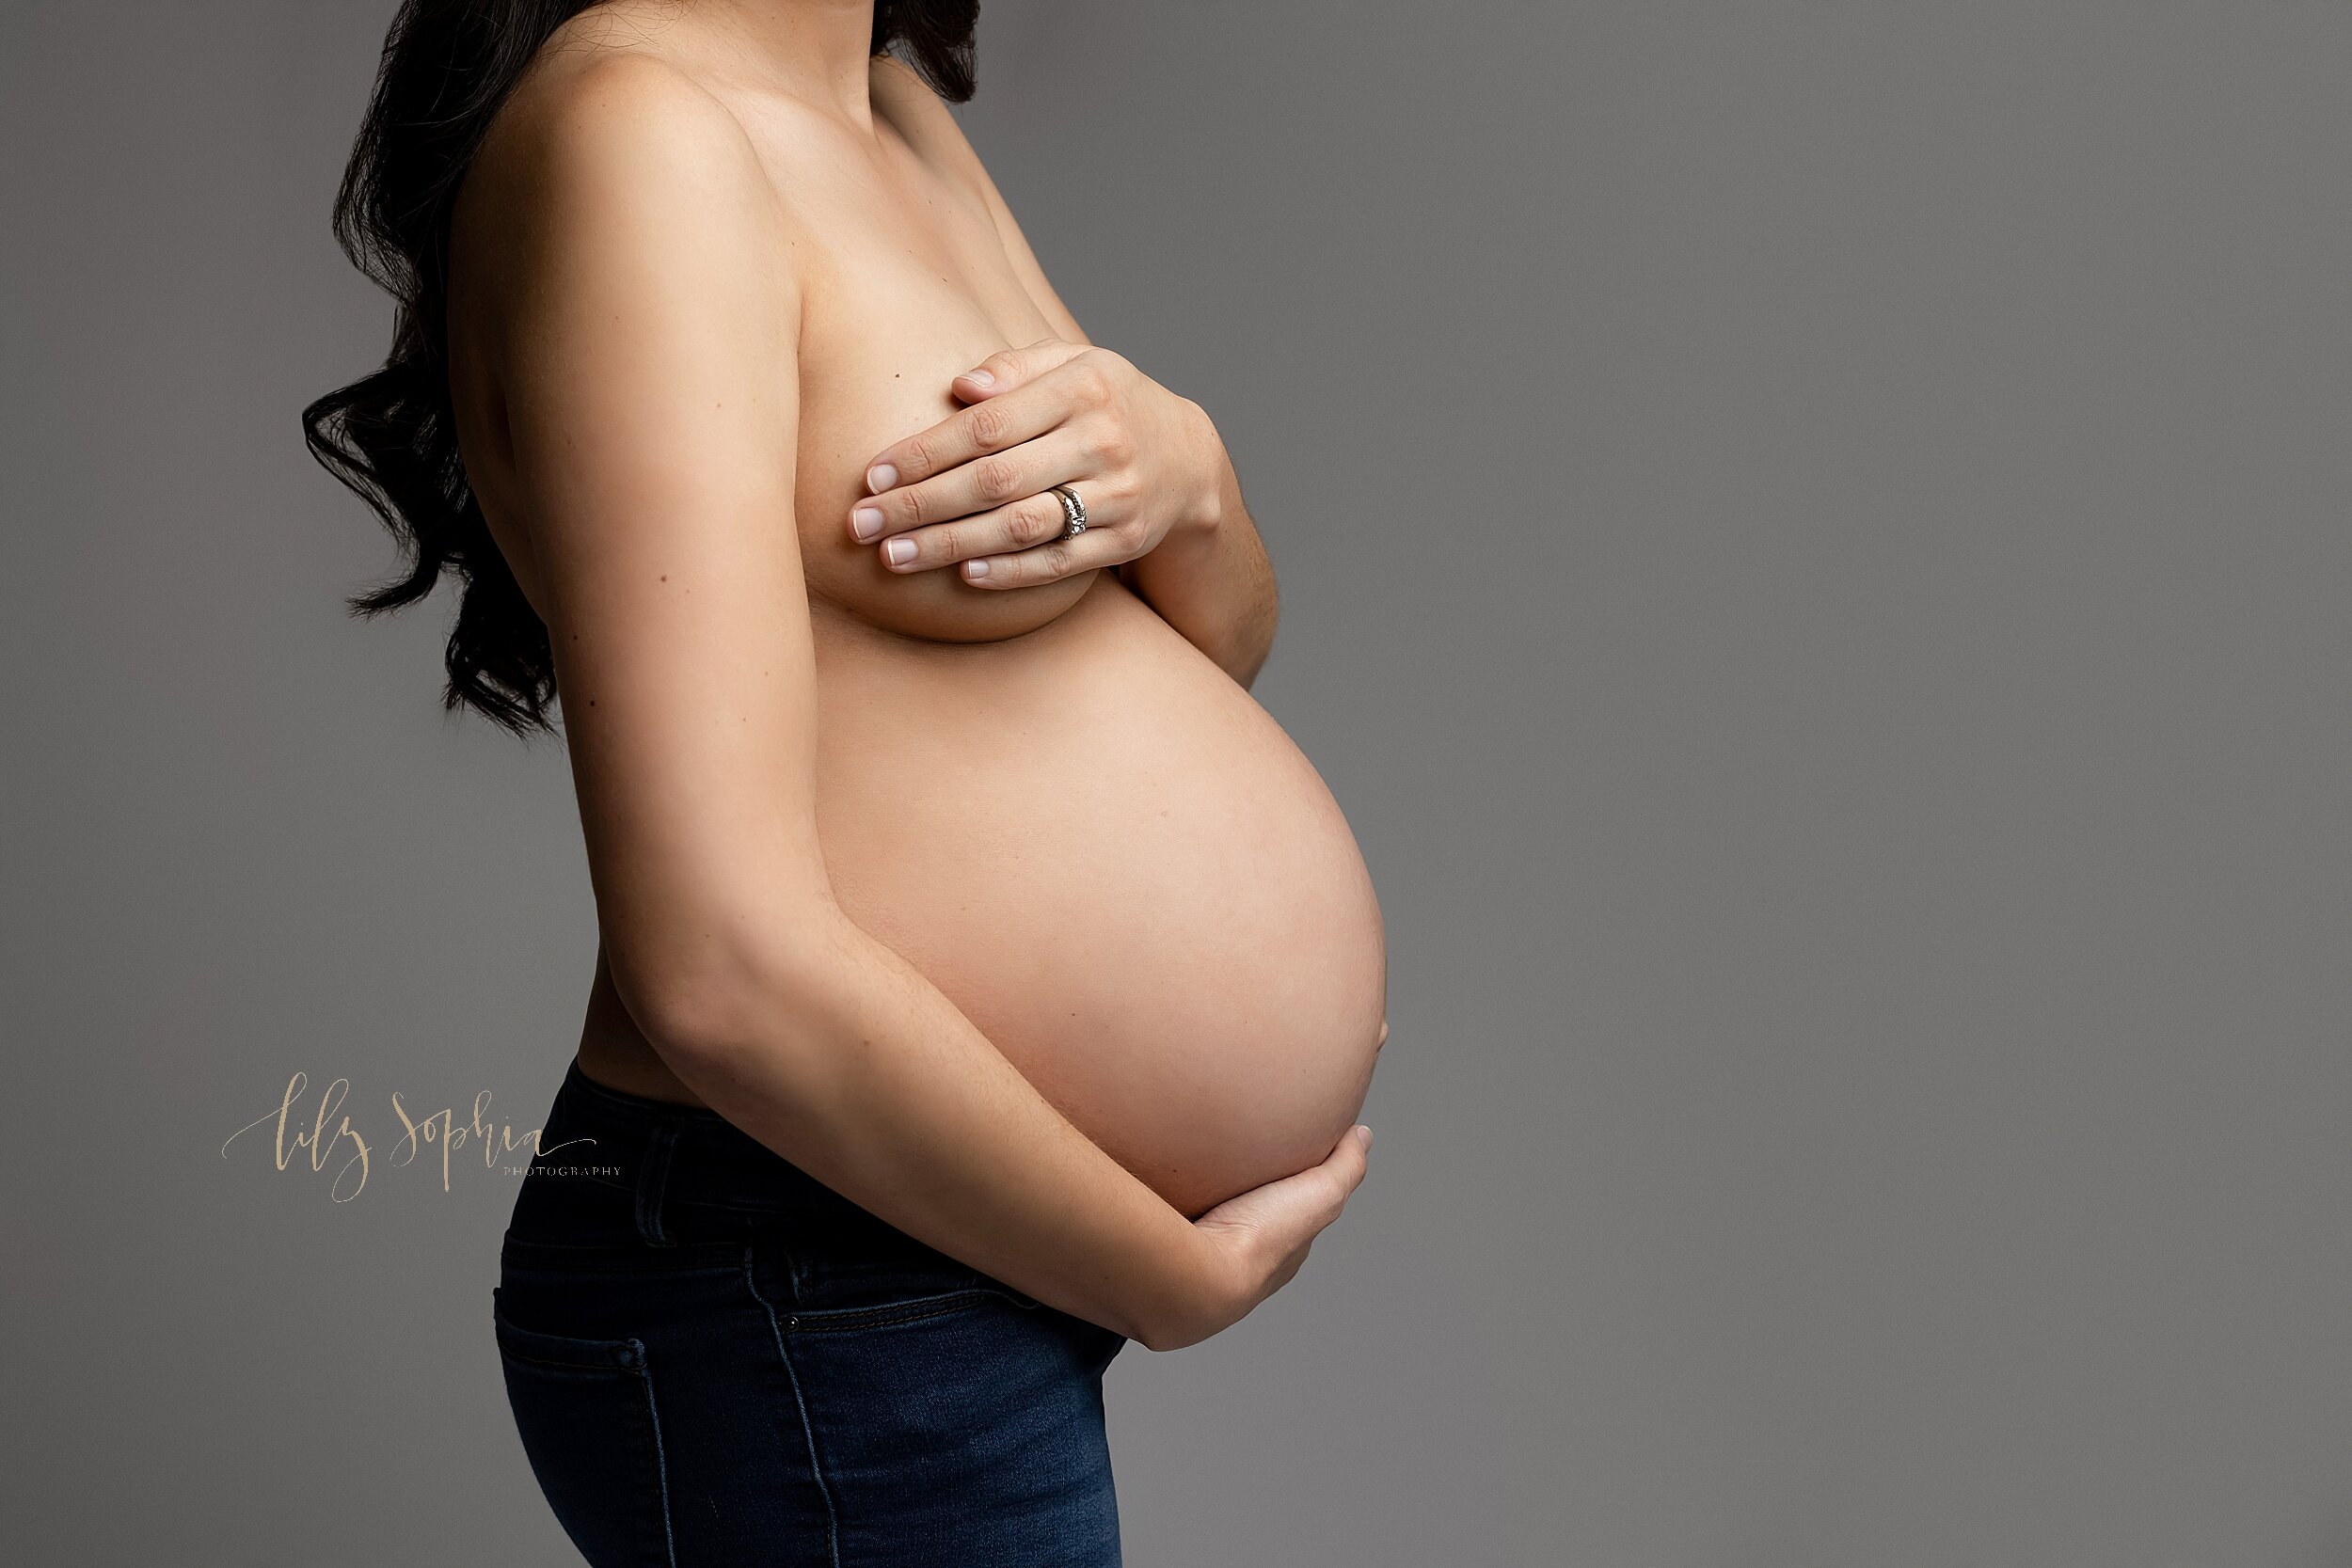  Atlanta Fine art modern maternity portrait of pregnant woman wearing jeans and holding her baby belly with strategic hand placement over her breasts.  